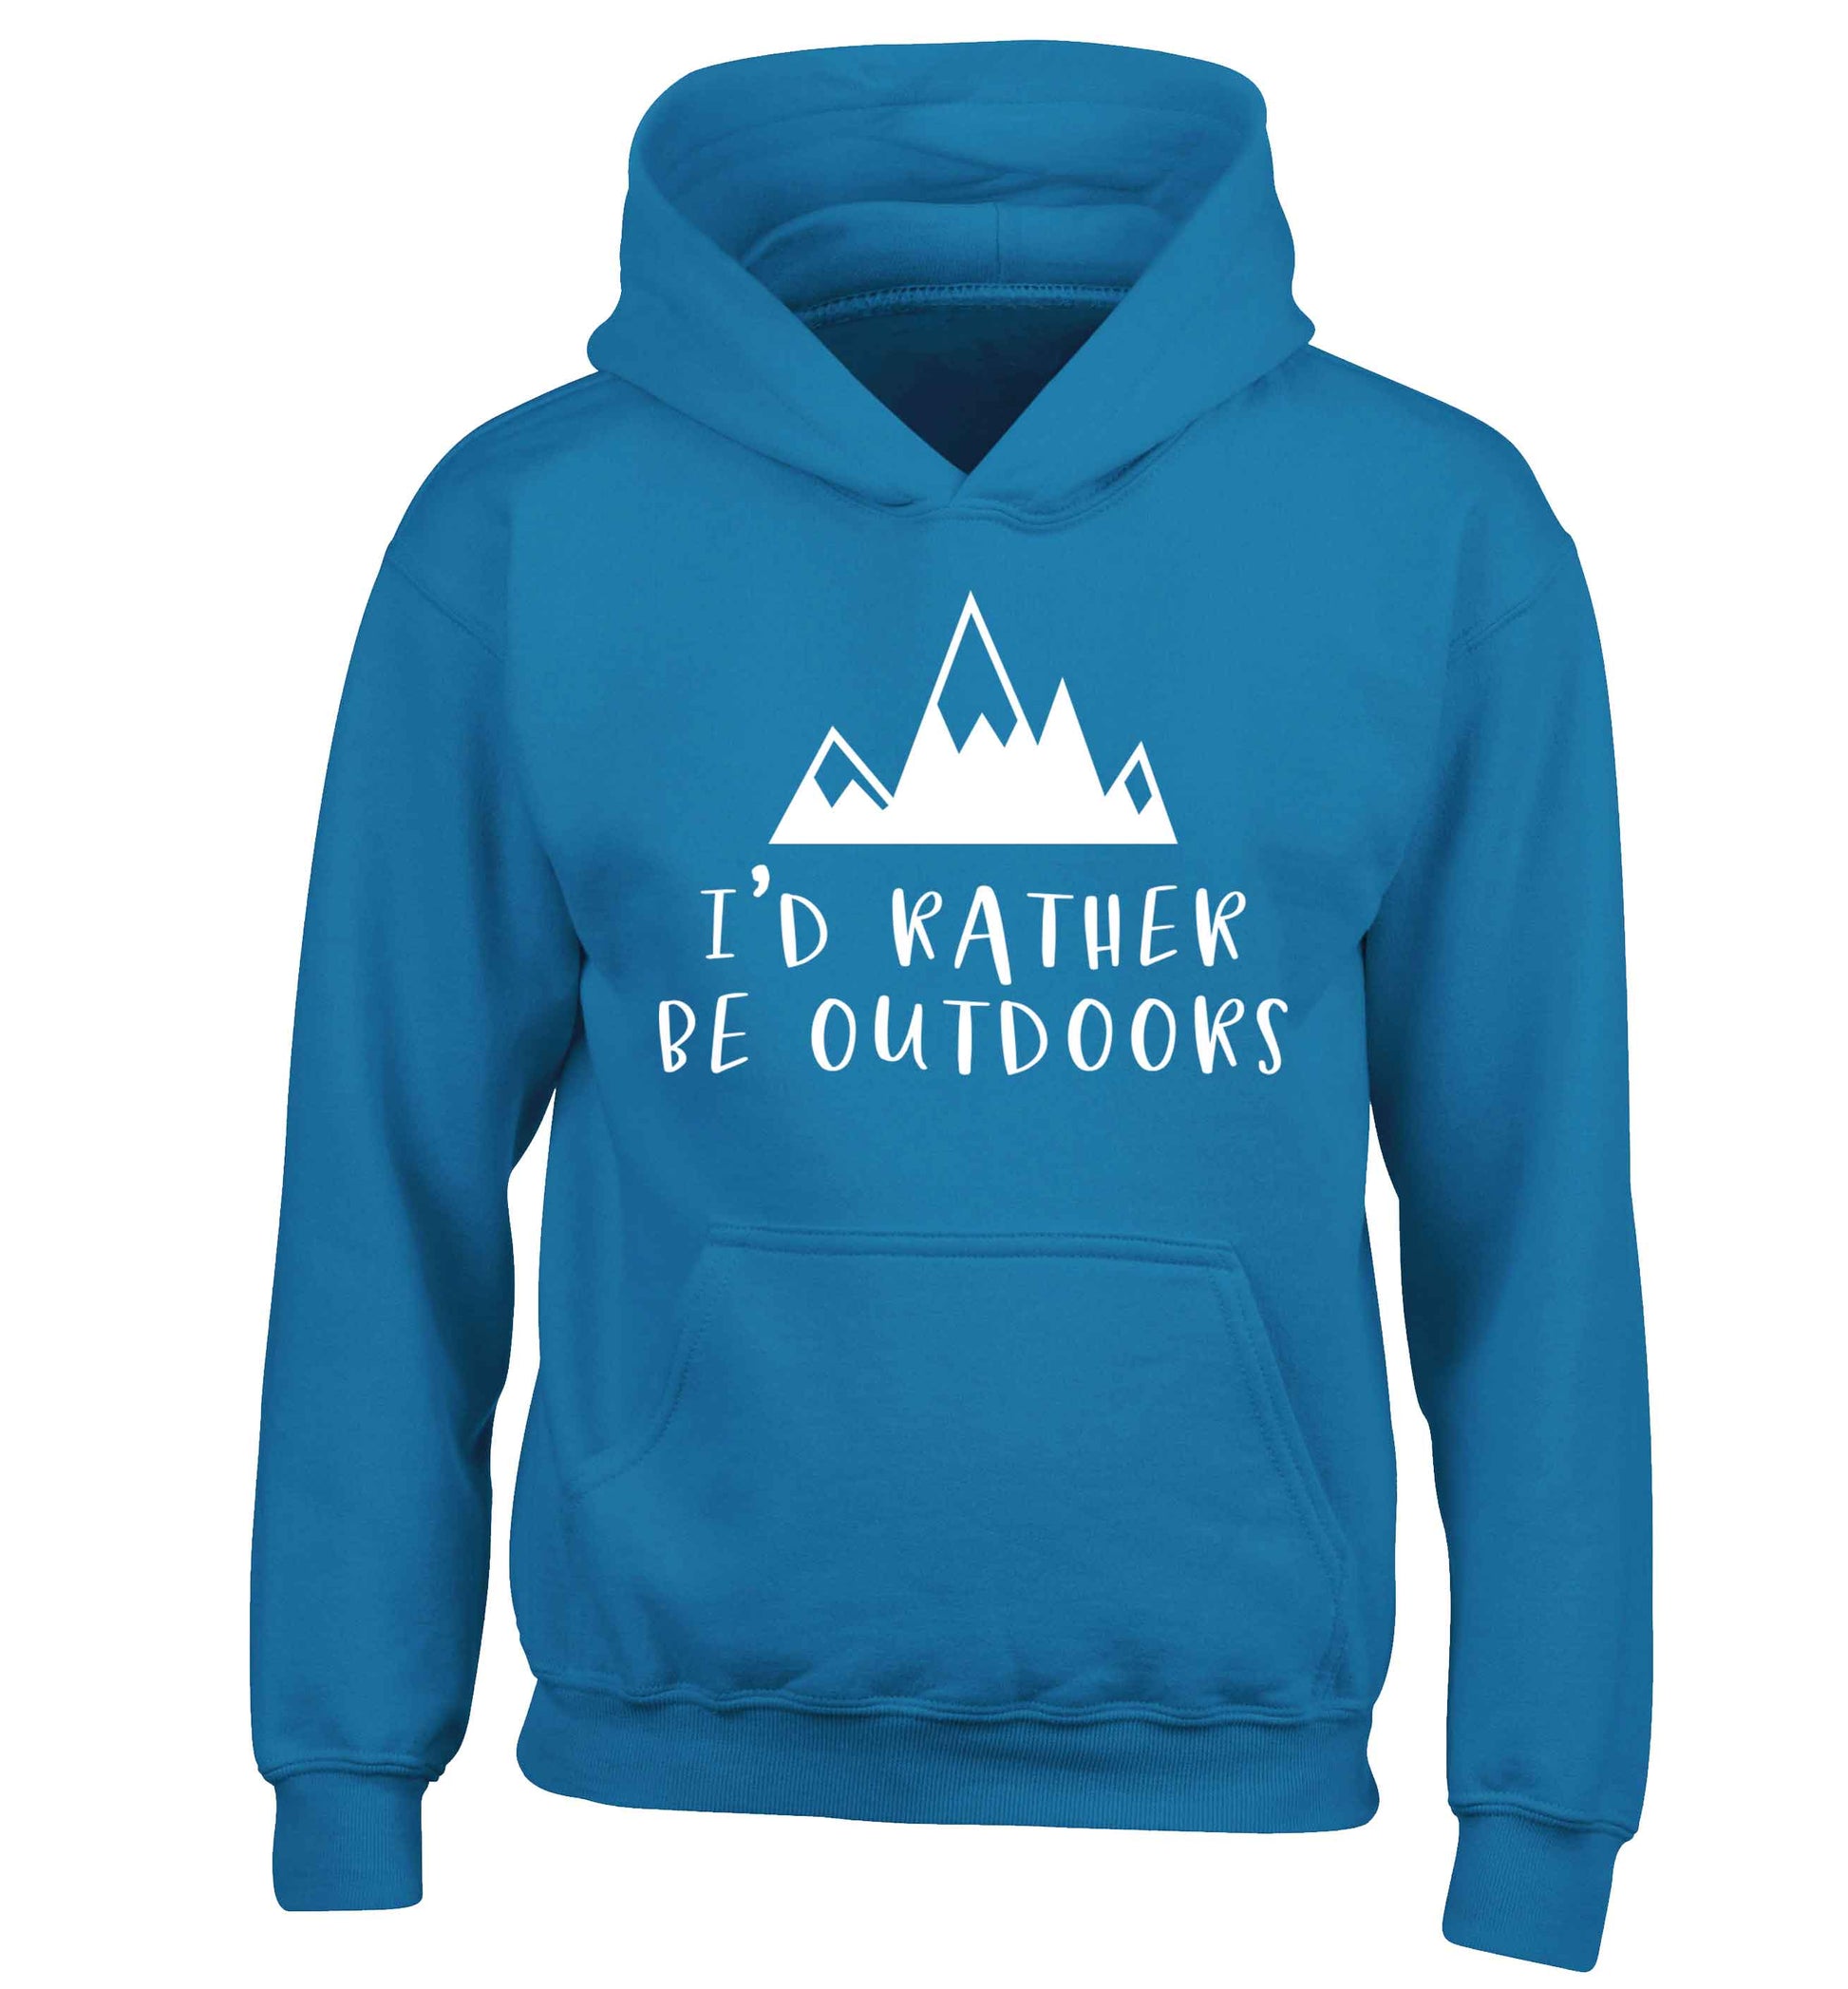 I'd rather be outdoors children's blue hoodie 12-13 Years